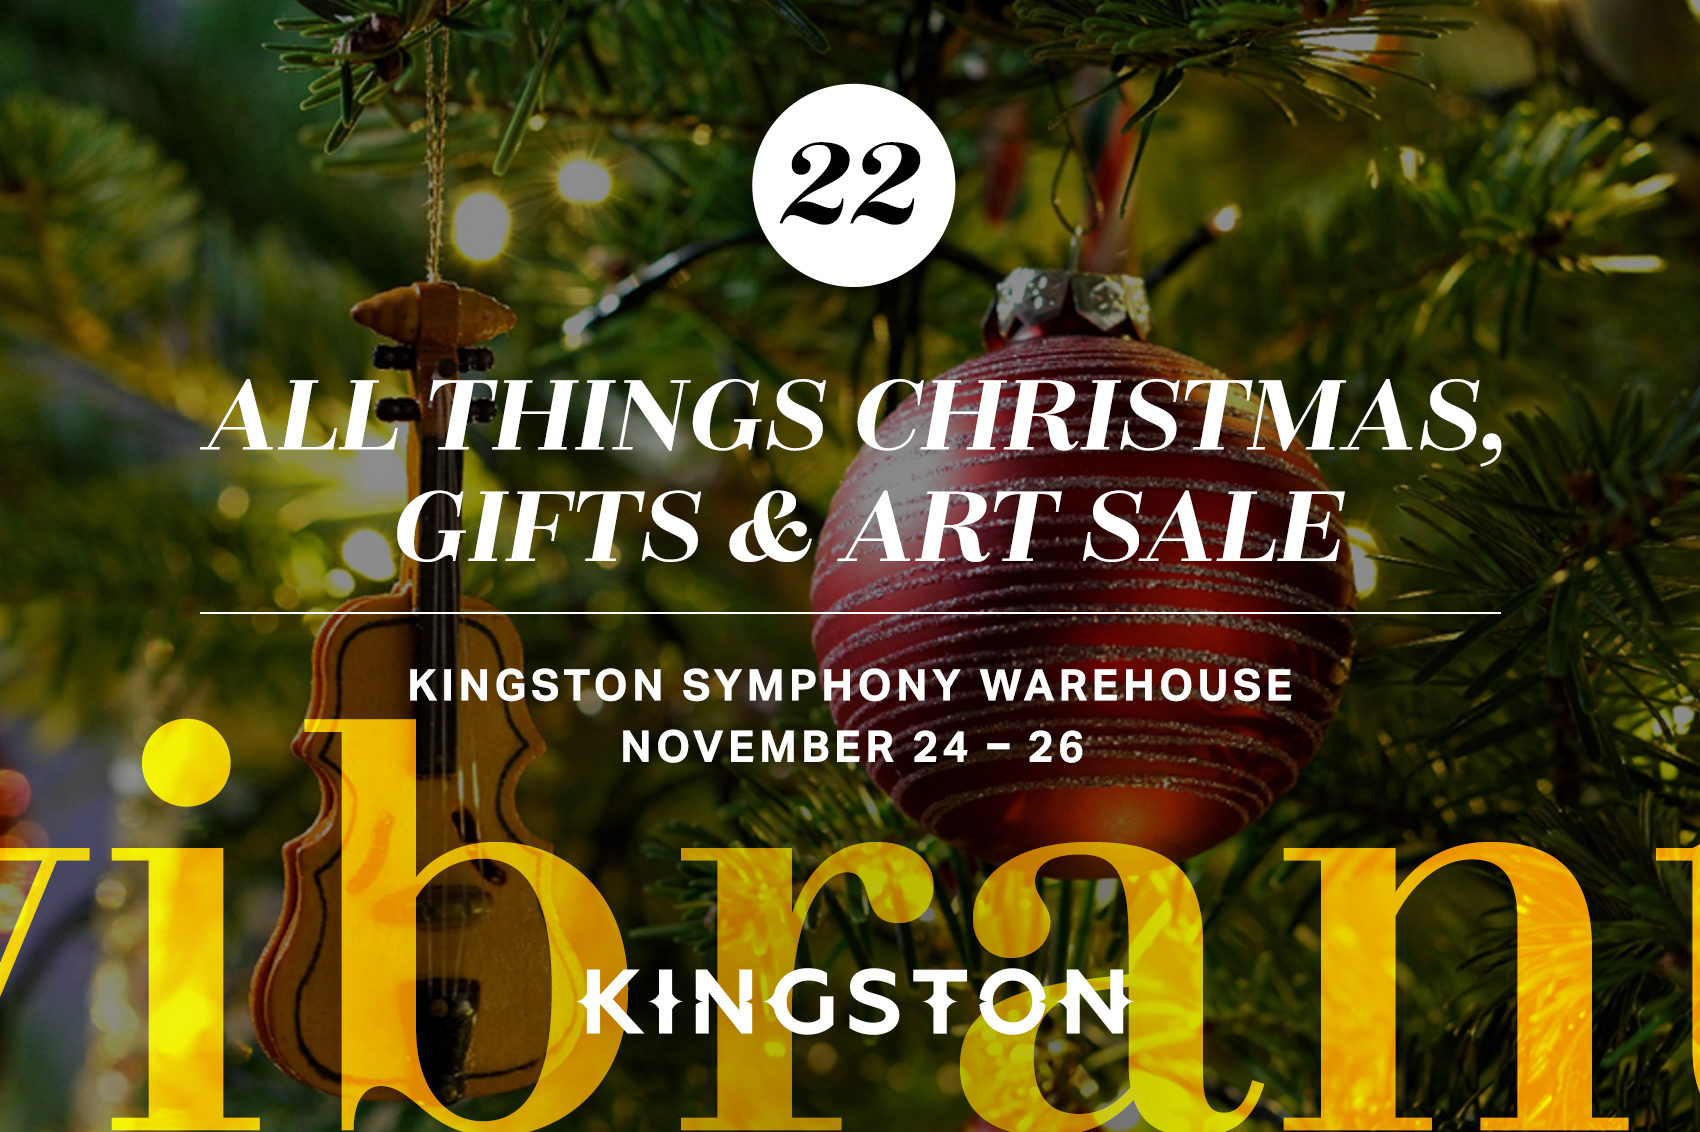 All things Christmas, gifts & art sale